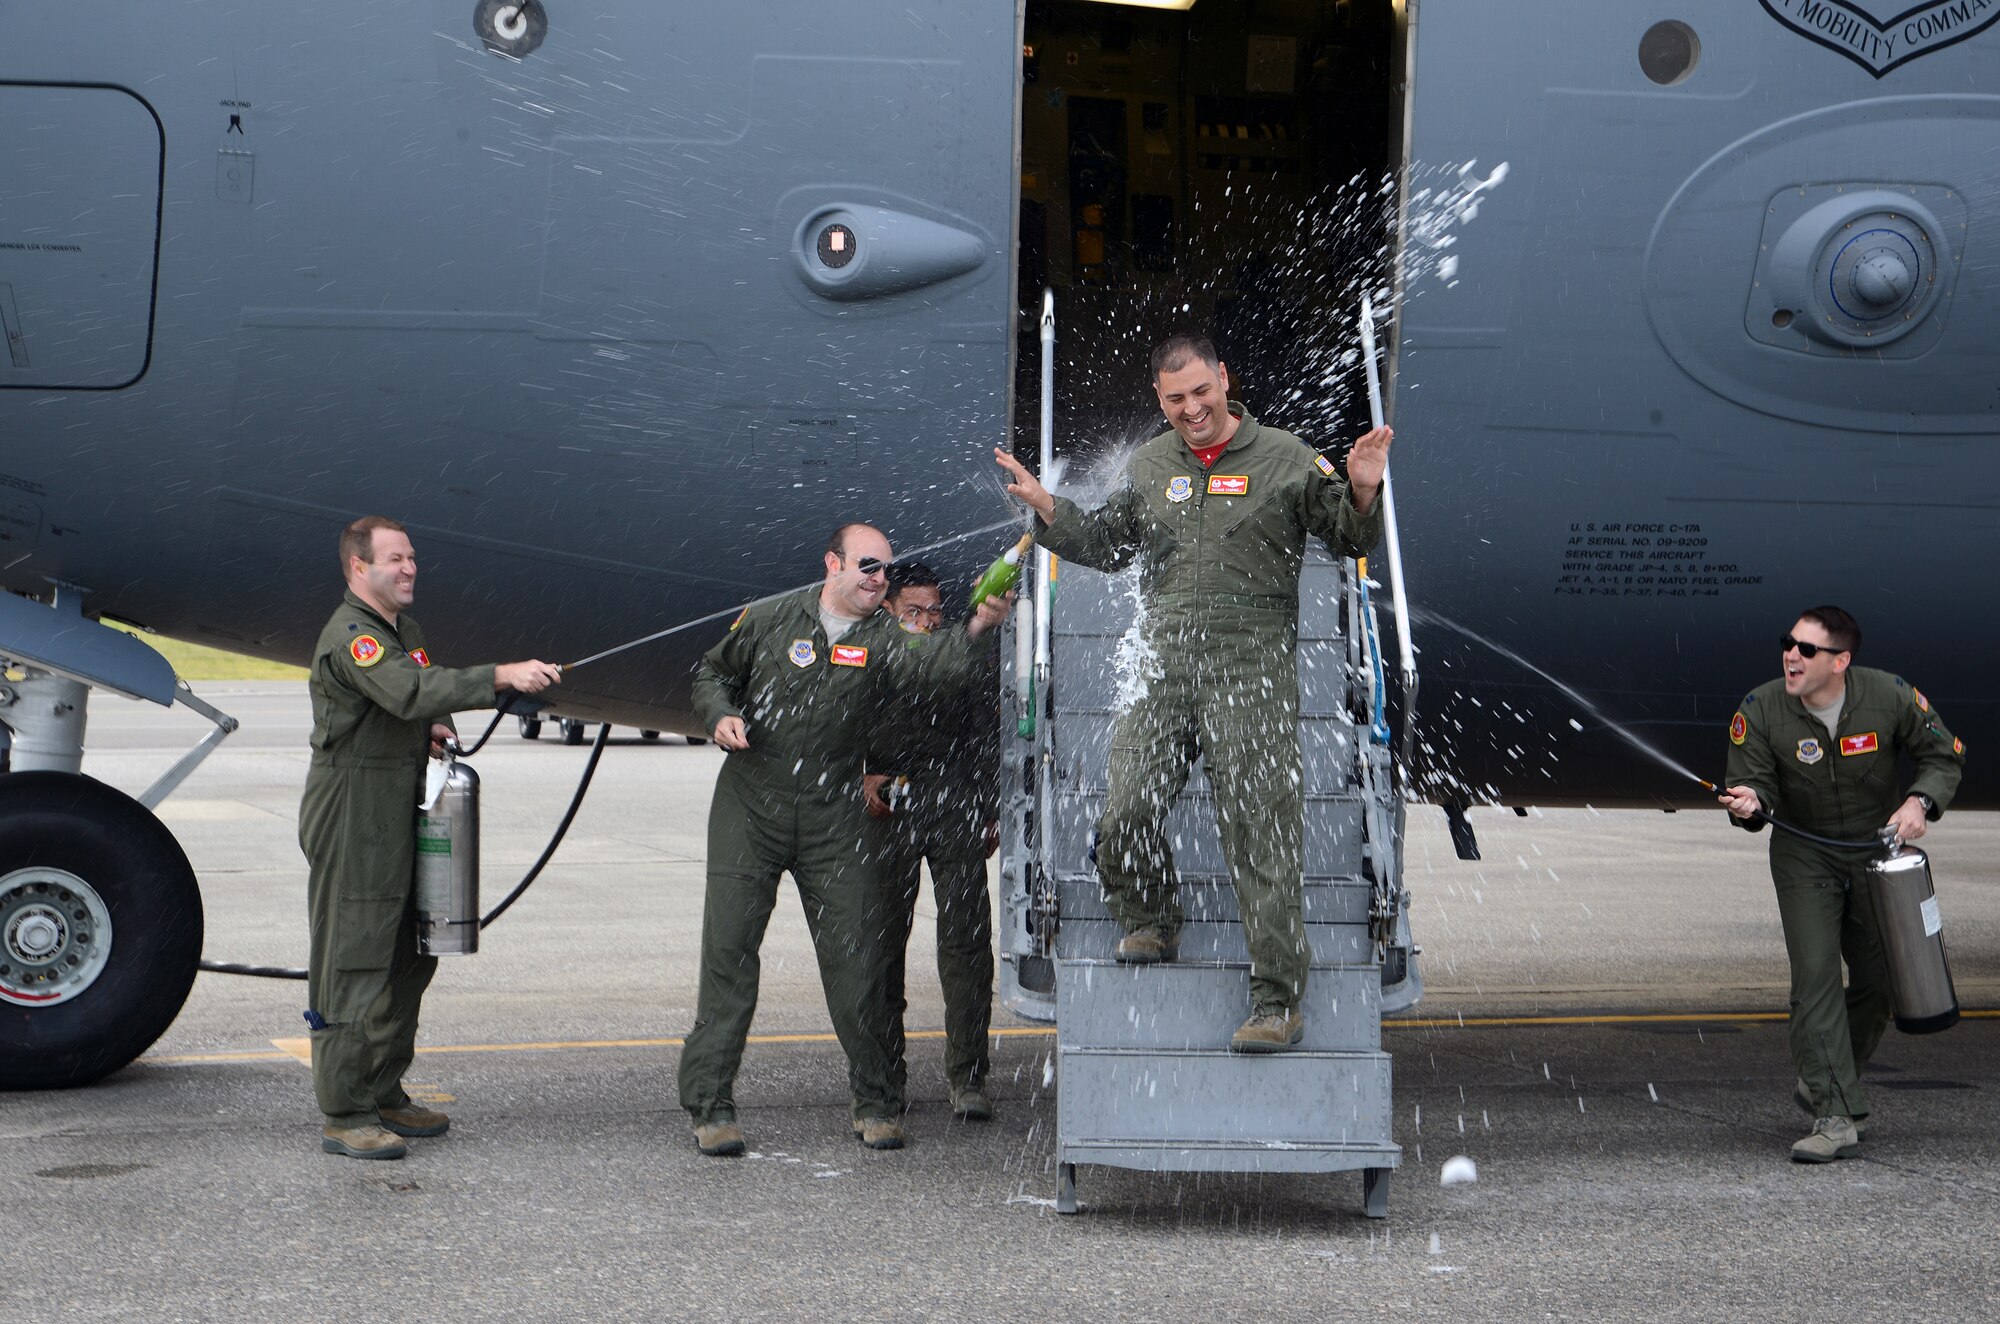 Lt. Col. Nathan Campbell, 10th Airlift Squadron commander, laughs at being sprayed with water after flying his last flight as commander of the 10 AS prior to the unit’s inactivation, May 3, 2016, at Joint Base Lewis-McChord, Wash. As part of an Air Force tradition among pilots, aircraft commanders are sprayed with water after flying their last flight, called a fini flight. For the fifth time in its 76-year history, the 10th AS was inactivated in a ceremony here May 6, 2016.(U.S. Air Force photo/Senior Airman Jacob Jimenez) 